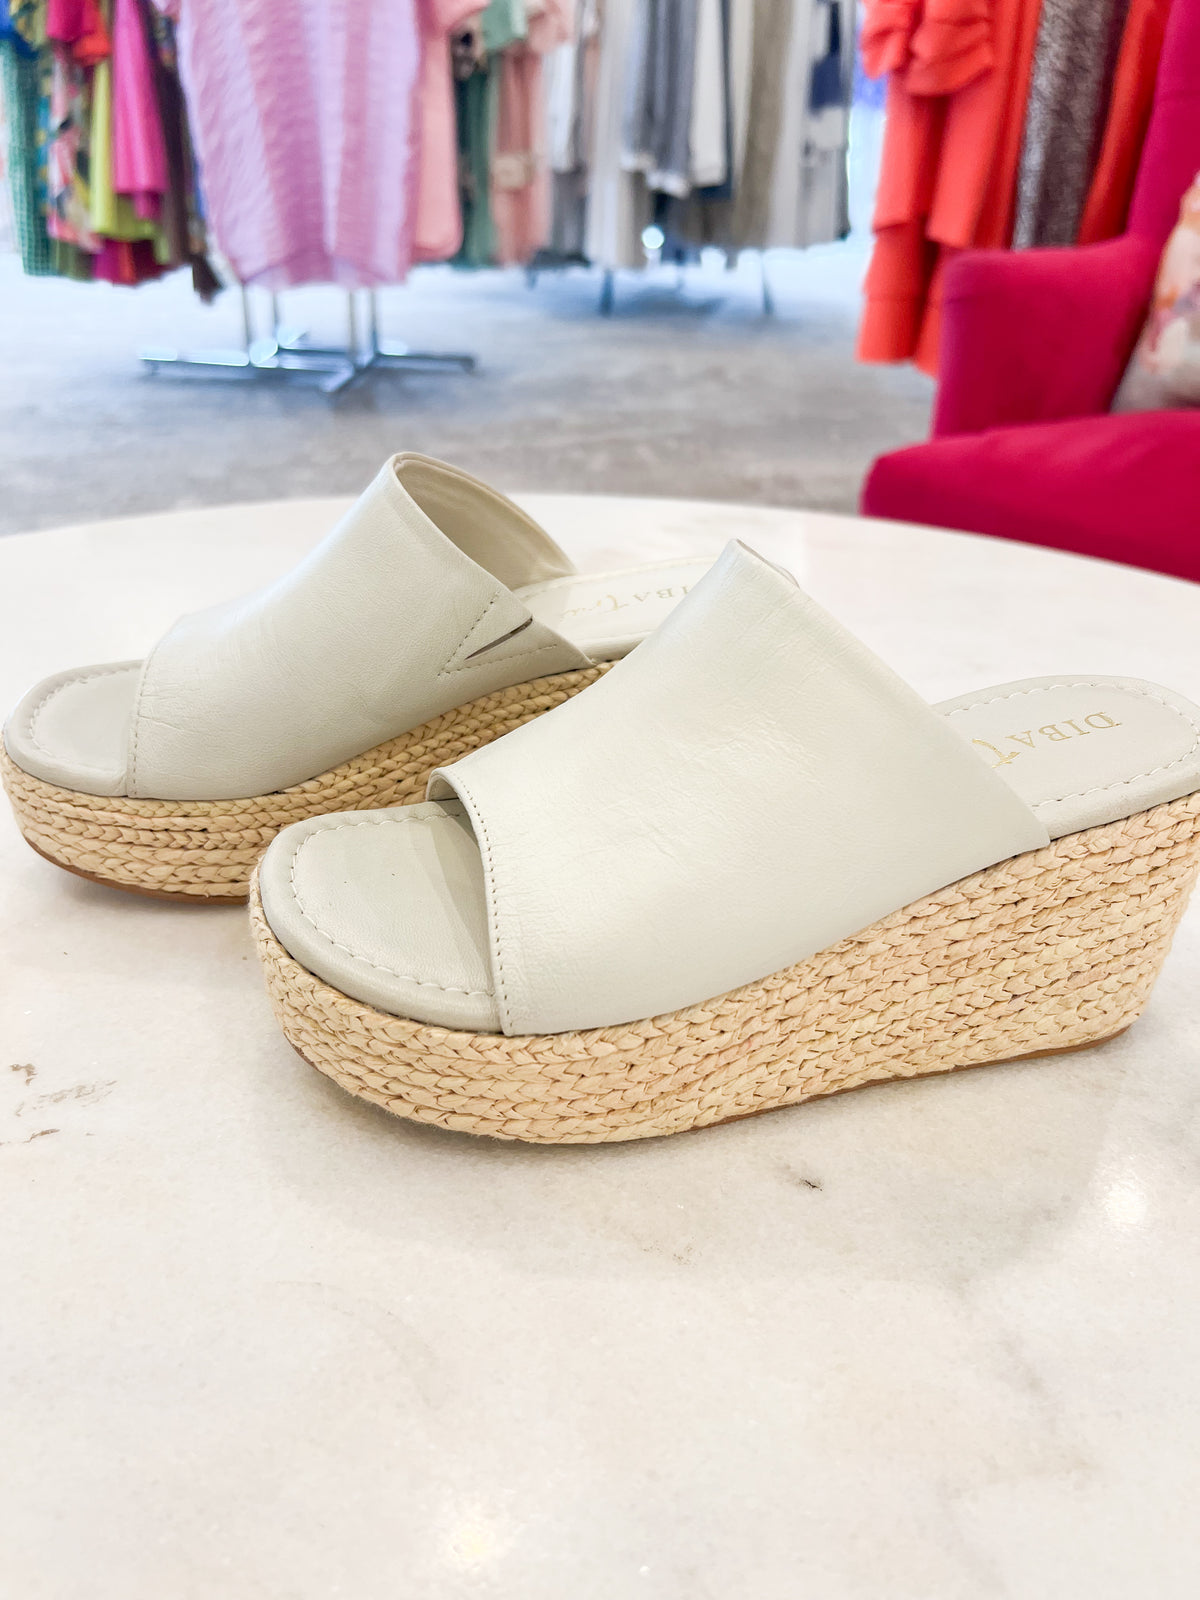 Go Getter Wedge Sandals